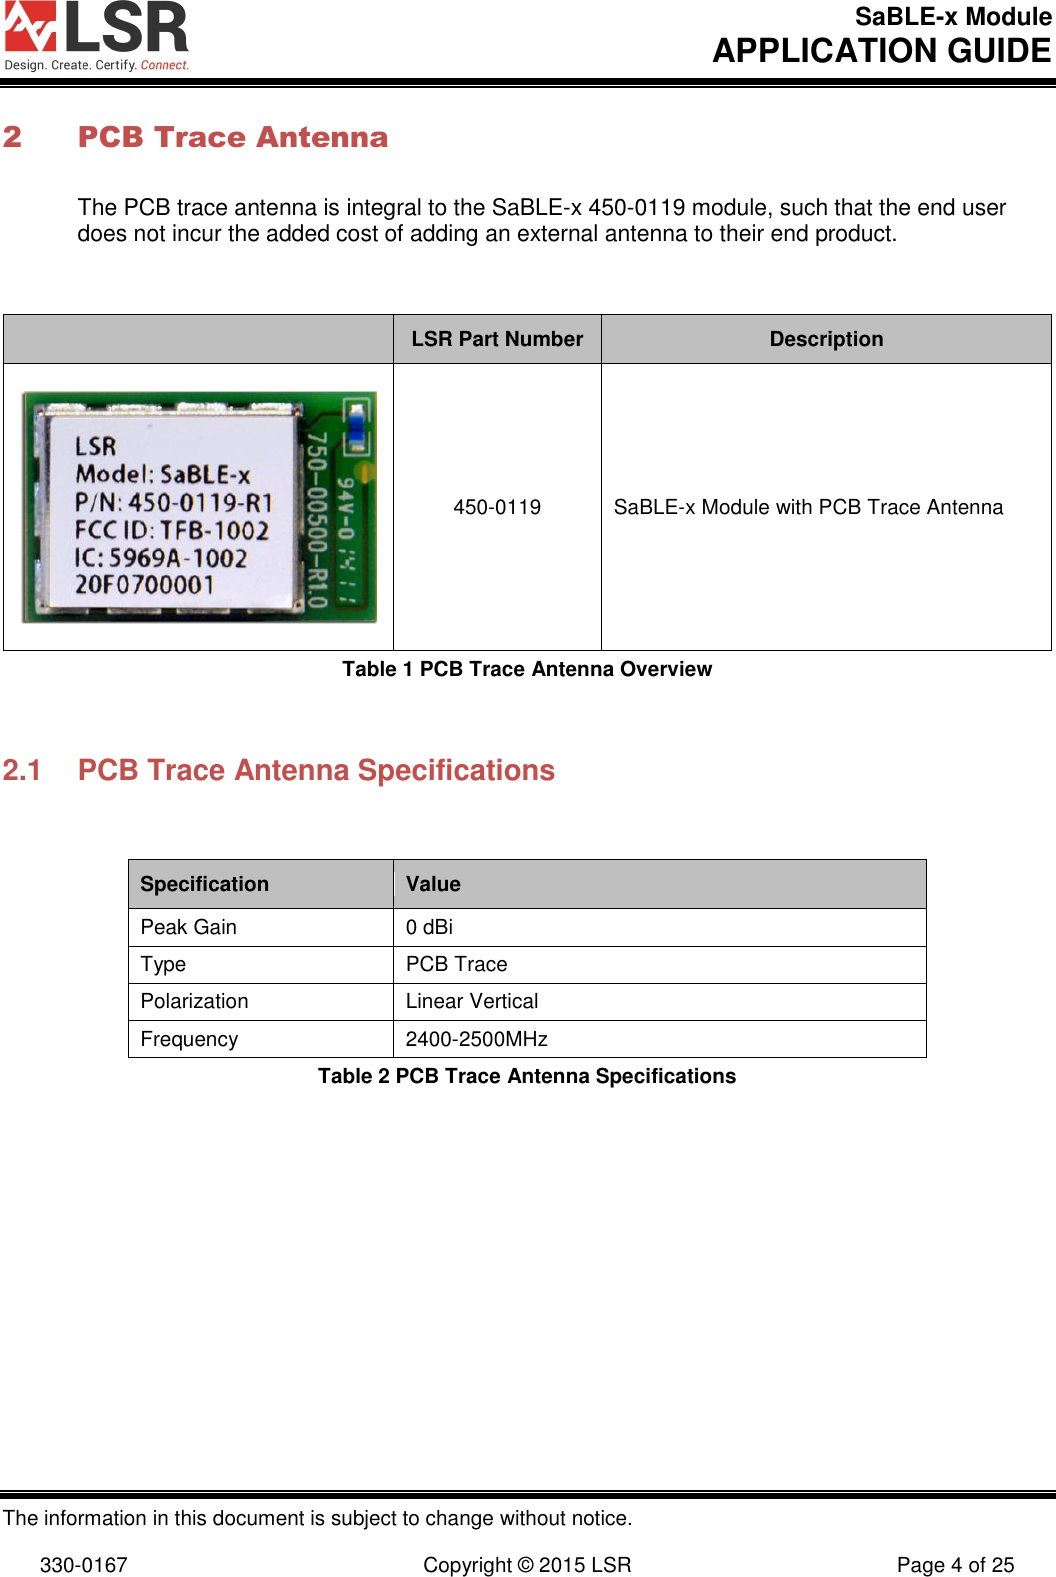 SaBLE-x Module       APPLICATION GUIDE  The information in this document is subject to change without notice.  330-0167  Copyright © 2015 LSR  Page 4 of 25 2 PCB Trace Antenna The PCB trace antenna is integral to the SaBLE-x 450-0119 module, such that the end user does not incur the added cost of adding an external antenna to their end product.        LSR Part Number Description  450-0119 SaBLE-x Module with PCB Trace Antenna Table 1 PCB Trace Antenna Overview  2.1  PCB Trace Antenna Specifications  Specification Value Peak Gain  0 dBi Type PCB Trace Polarization Linear Vertical Frequency 2400-2500MHz Table 2 PCB Trace Antenna Specifications        